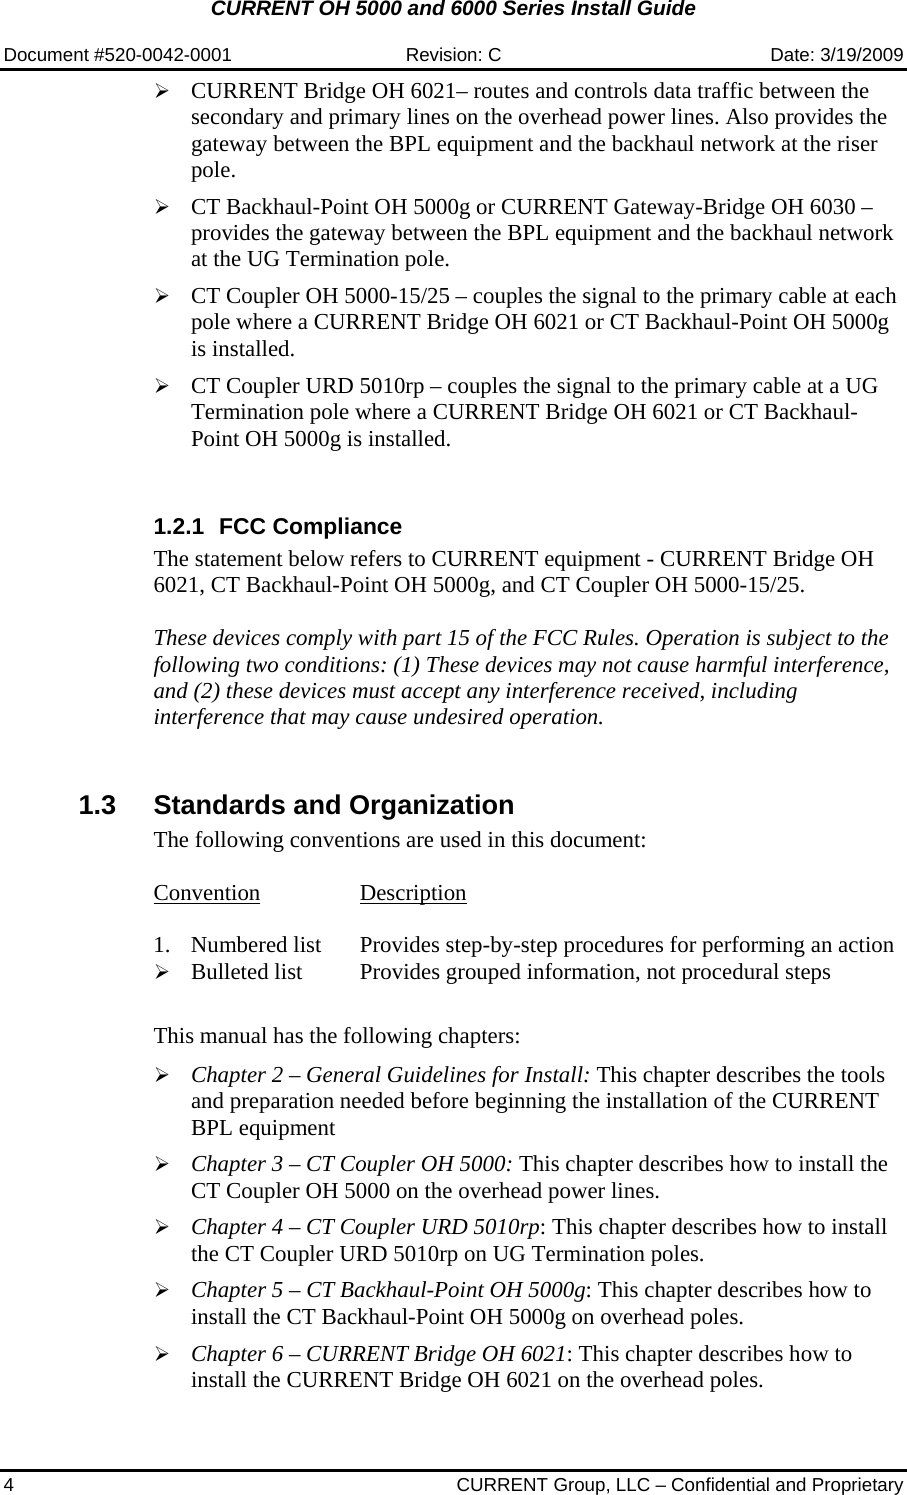 CURRENT OH 5000 and 6000 Series Install Guide  Document #520-0042-0001  Revision: C  Date: 3/19/2009 4  CURRENT Group, LLC – Confidential and Proprietary ¾ CURRENT Bridge OH 6021– routes and controls data traffic between the secondary and primary lines on the overhead power lines. Also provides the gateway between the BPL equipment and the backhaul network at the riser pole. ¾ CT Backhaul-Point OH 5000g or CURRENT Gateway-Bridge OH 6030 – provides the gateway between the BPL equipment and the backhaul network at the UG Termination pole. ¾ CT Coupler OH 5000-15/25 – couples the signal to the primary cable at each pole where a CURRENT Bridge OH 6021 or CT Backhaul-Point OH 5000g is installed. ¾ CT Coupler URD 5010rp – couples the signal to the primary cable at a UG Termination pole where a CURRENT Bridge OH 6021 or CT Backhaul-Point OH 5000g is installed.  1.2.1 FCC Compliance The statement below refers to CURRENT equipment - CURRENT Bridge OH 6021, CT Backhaul-Point OH 5000g, and CT Coupler OH 5000-15/25.  These devices comply with part 15 of the FCC Rules. Operation is subject to the following two conditions: (1) These devices may not cause harmful interference, and (2) these devices must accept any interference received, including interference that may cause undesired operation.   1.3  Standards and Organization The following conventions are used in this document:  Convention Description  1.   Numbered list  Provides step-by-step procedures for performing an action ¾ Bulleted list  Provides grouped information, not procedural steps     This manual has the following chapters:  ¾ Chapter 2 – General Guidelines for Install: This chapter describes the tools and preparation needed before beginning the installation of the CURRENT BPL equipment ¾ Chapter 3 – CT Coupler OH 5000: This chapter describes how to install the CT Coupler OH 5000 on the overhead power lines. ¾ Chapter 4 – CT Coupler URD 5010rp: This chapter describes how to install the CT Coupler URD 5010rp on UG Termination poles. ¾ Chapter 5 – CT Backhaul-Point OH 5000g: This chapter describes how to install the CT Backhaul-Point OH 5000g on overhead poles. ¾ Chapter 6 – CURRENT Bridge OH 6021: This chapter describes how to install the CURRENT Bridge OH 6021 on the overhead poles. 